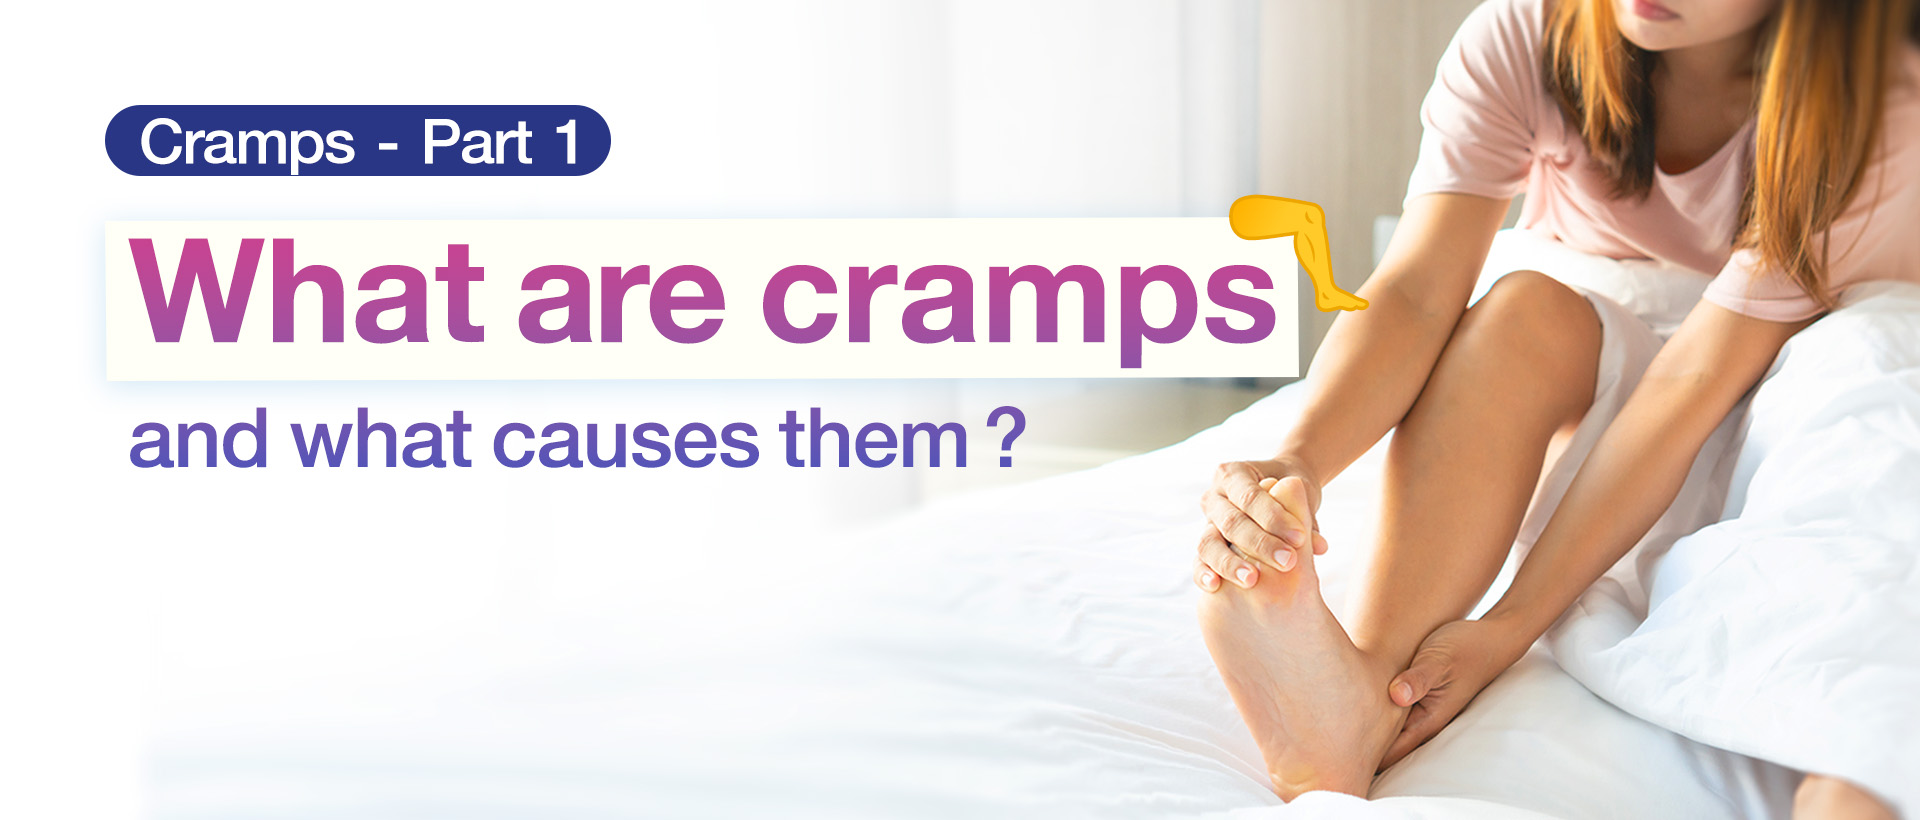 What are cramps and what causes them?